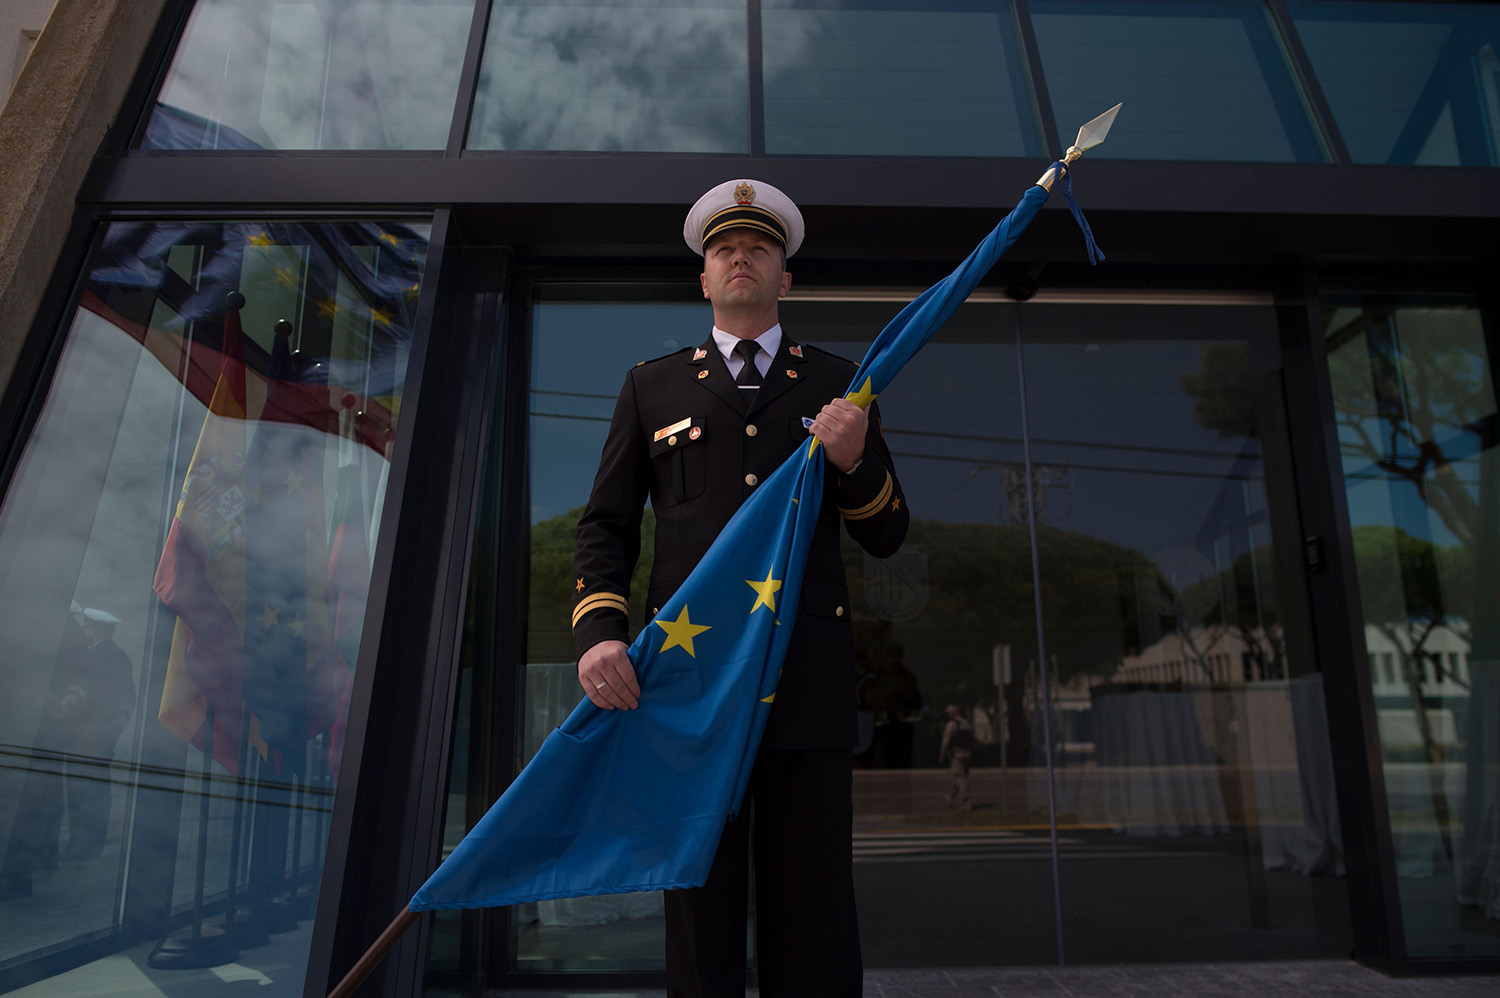 A soldier holds a European Union flag during a ceremony marking the relocation of the operation Headquarters of EU NAVFOR Atalanta Operation at the Rota Naval Base in Rota, on March 29, 2019. - The relocation of the Headquarters of the Operation has no precedent in the history of the EU and it includes the transfer to Brest of the Maritime Security Centre for the Horn of Africa, as part of the Operational Headquarters. On this occasion, the command has also been transferred from Major General Charlie Stickland, UK Royal Marines, to Vice Admiral Antonio Martorell Lacave, Spanish Navy. (Photo by JORGE GUERRERO / AFP) (Photo credit should read JORGE GUERRERO/AFP via Getty Images)